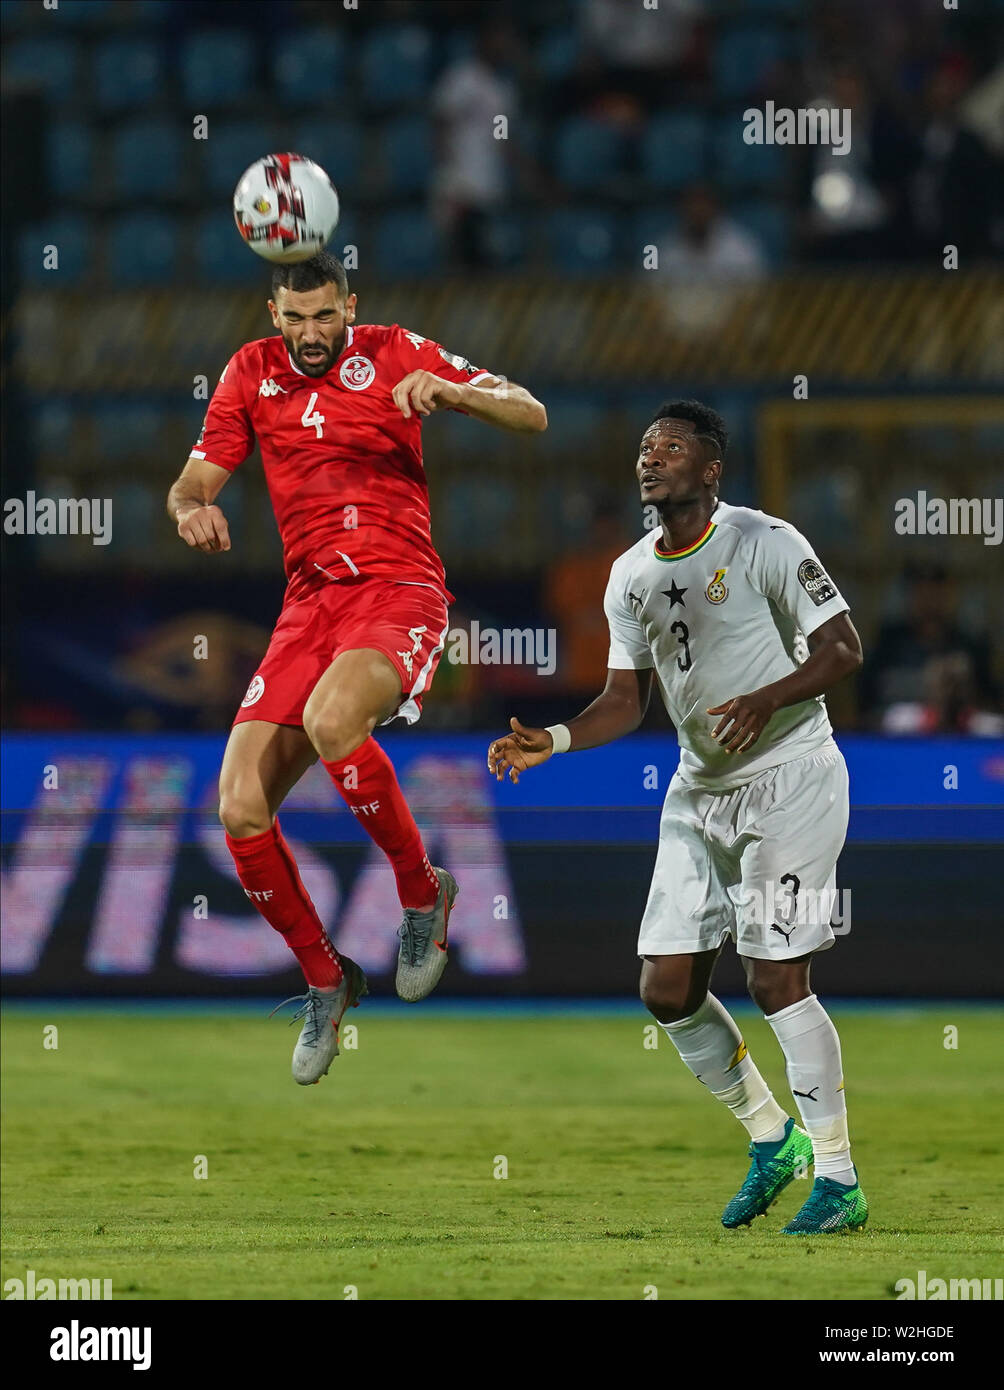 FRANCE OUT July 8, 2019: Yassine Meriah of Tunisia and Asamoah Gyan of Egypt during the 2019 African Cup of Nations match between Ghana and Tunisia at the Ismailia Stadium in Ismailia, Egypt. Ulrik Pedersen/CSM. Stock Photo